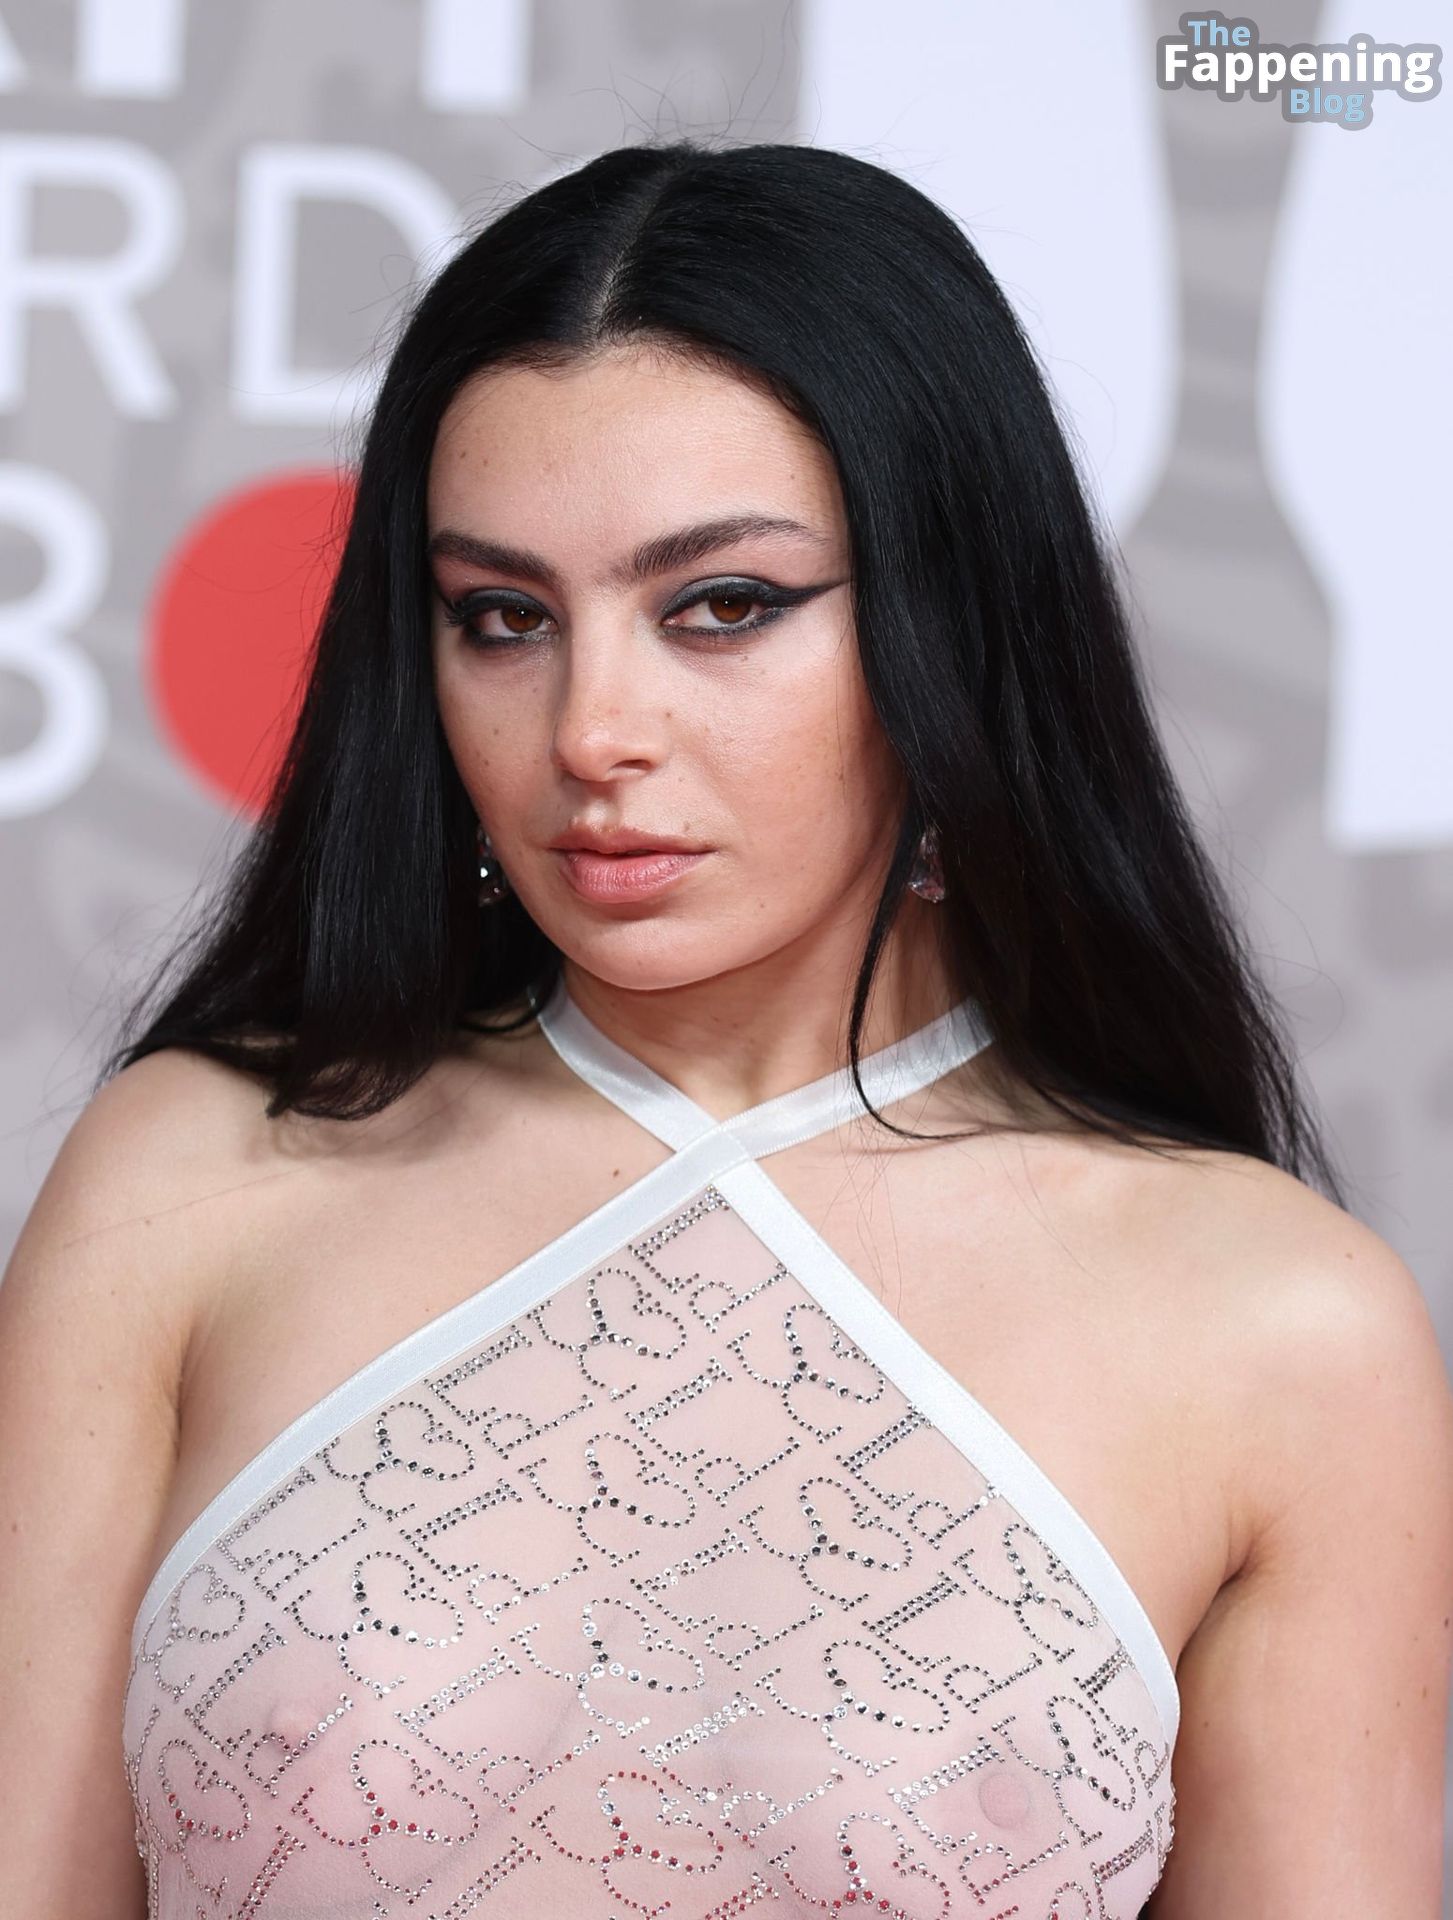 Charli XCX See Through Nudity The Fappening Blog 18